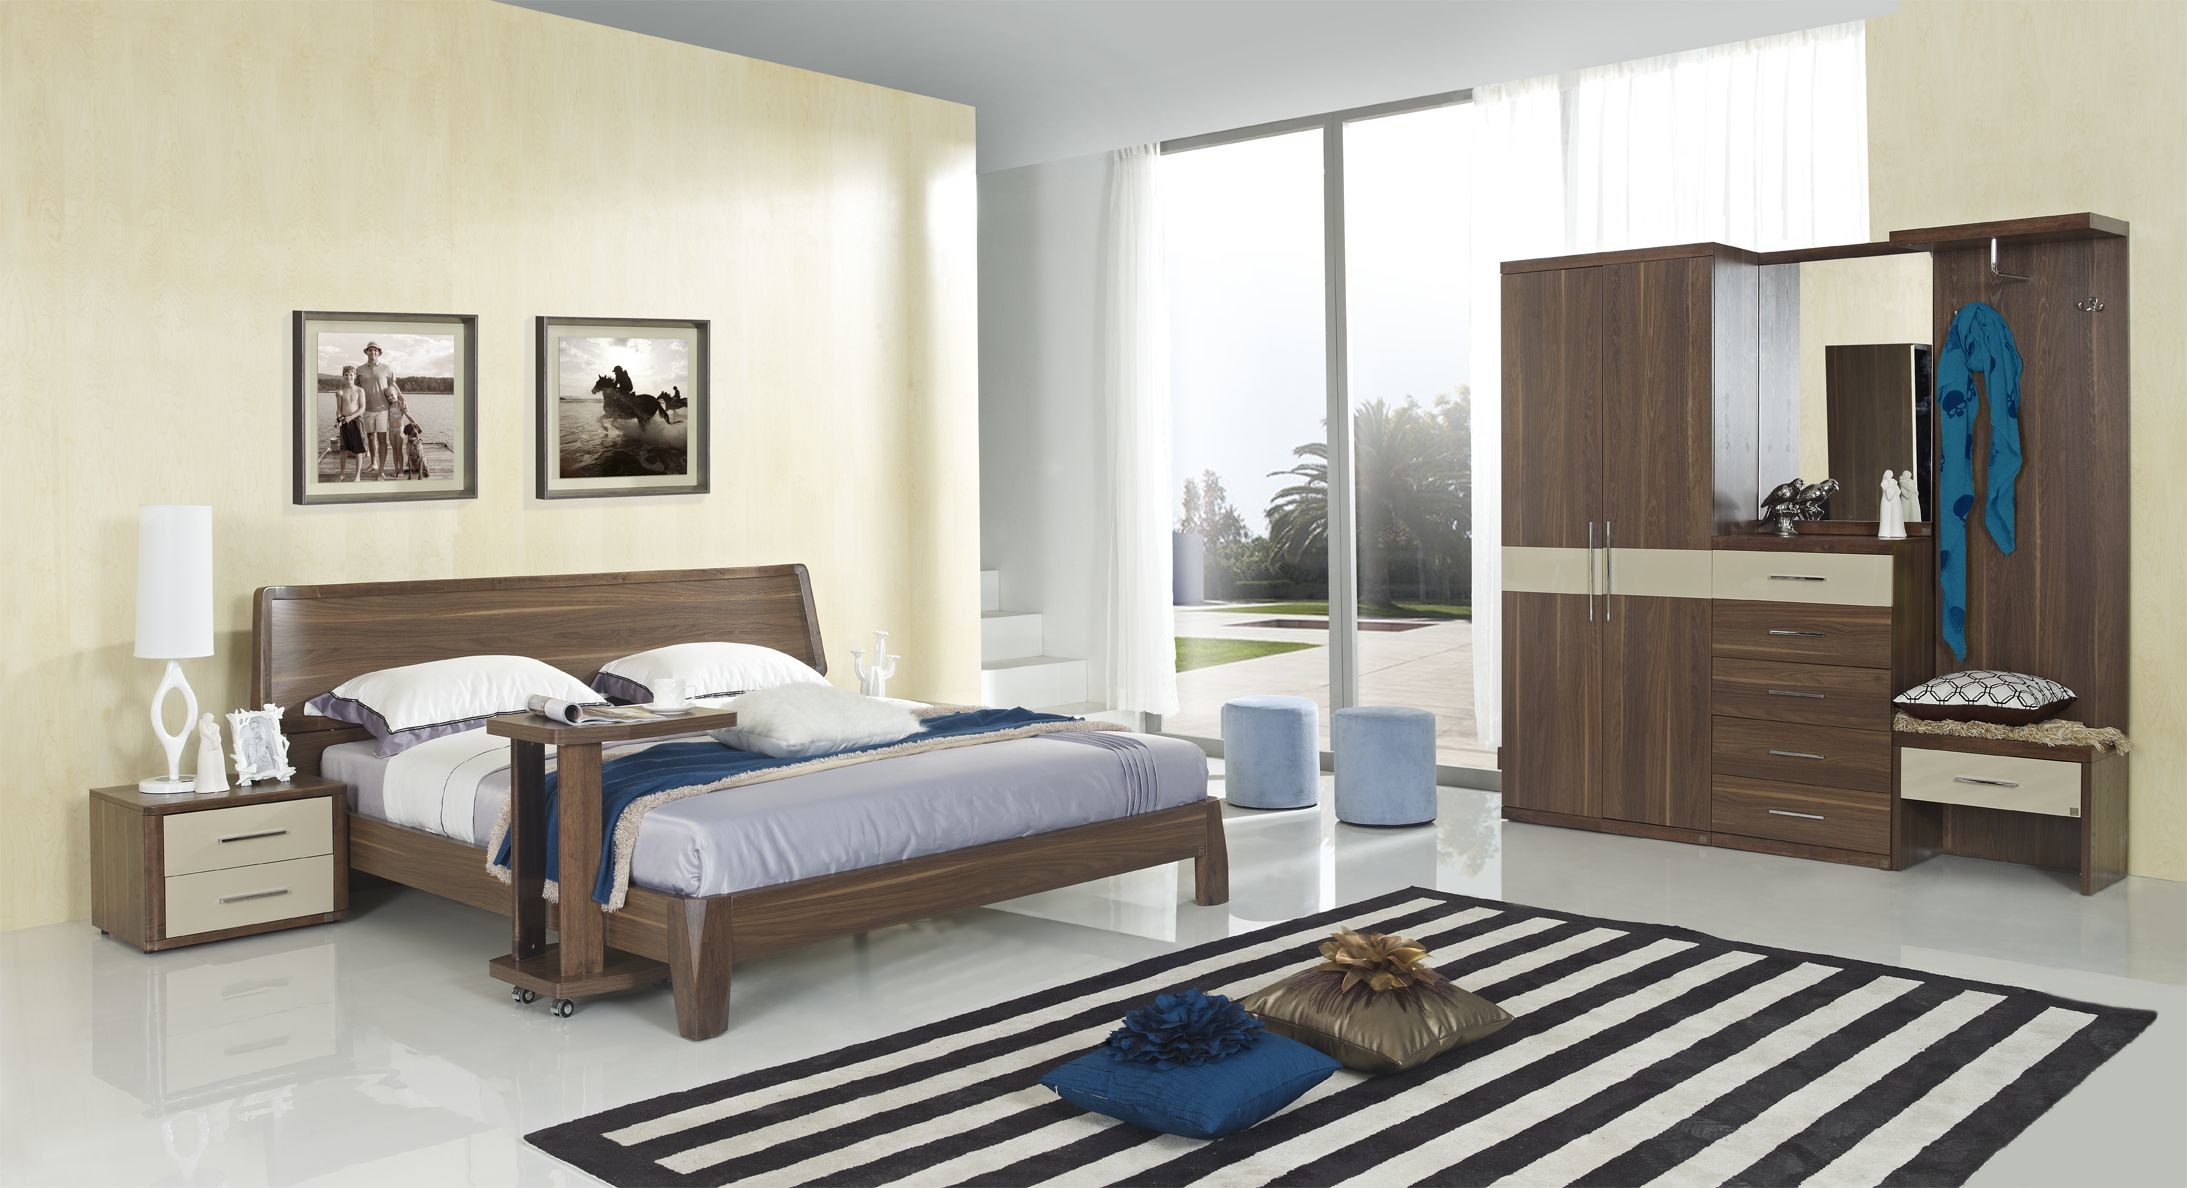 China Walnut wood home bedroom furniture sets by curved headboard bed and full mirror stand wholesale